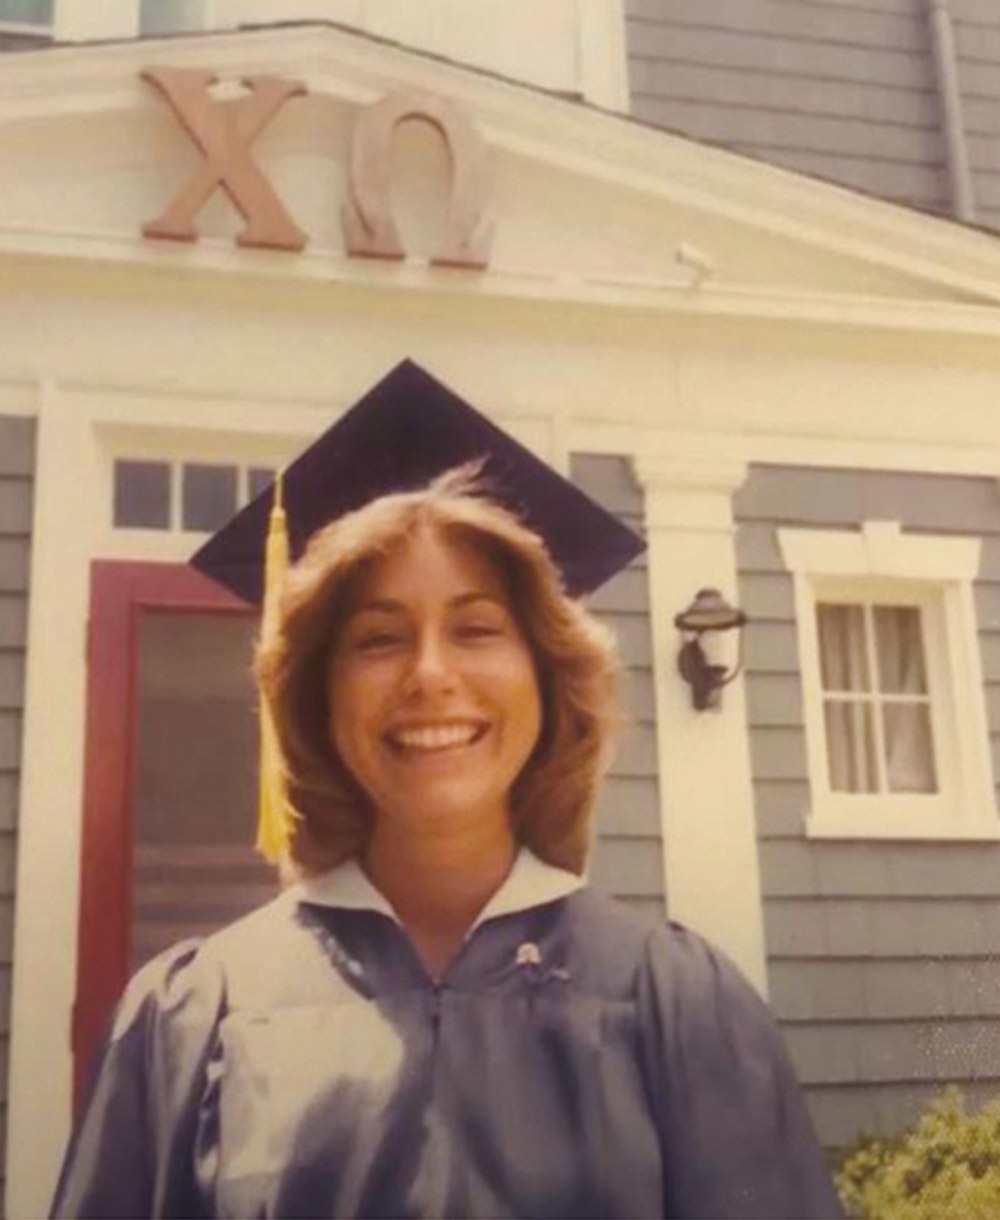 Jude Blake in cap and gown in 1977 in front of her sorority house